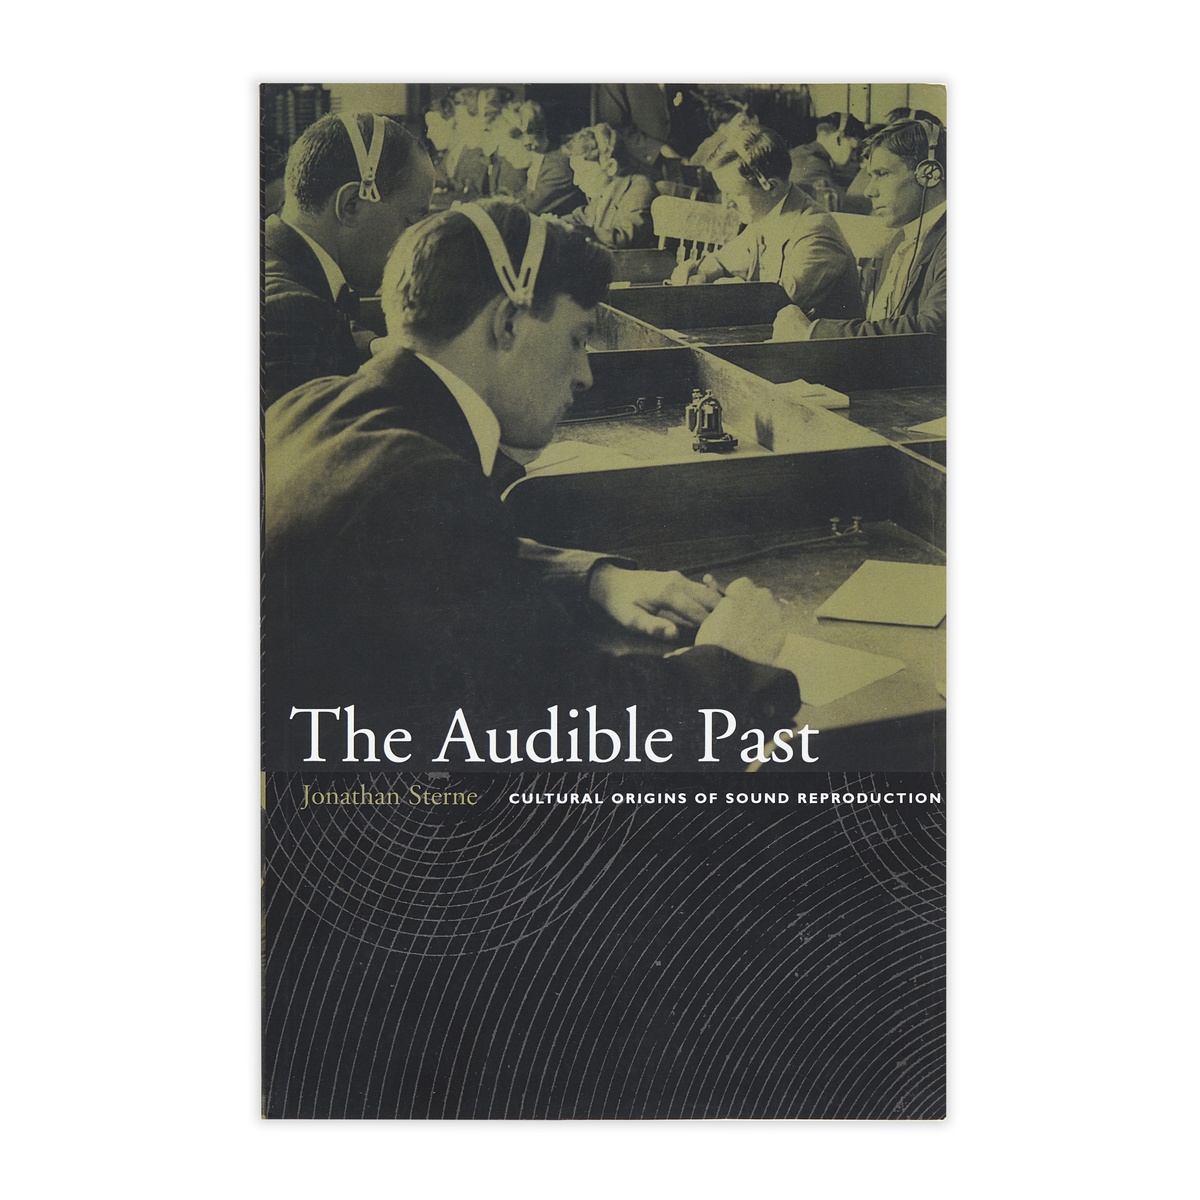 Photograph of the cover of Jonathan Stern's book 'The Audible Past: Cultural Origins of Sound Reproduction'.
